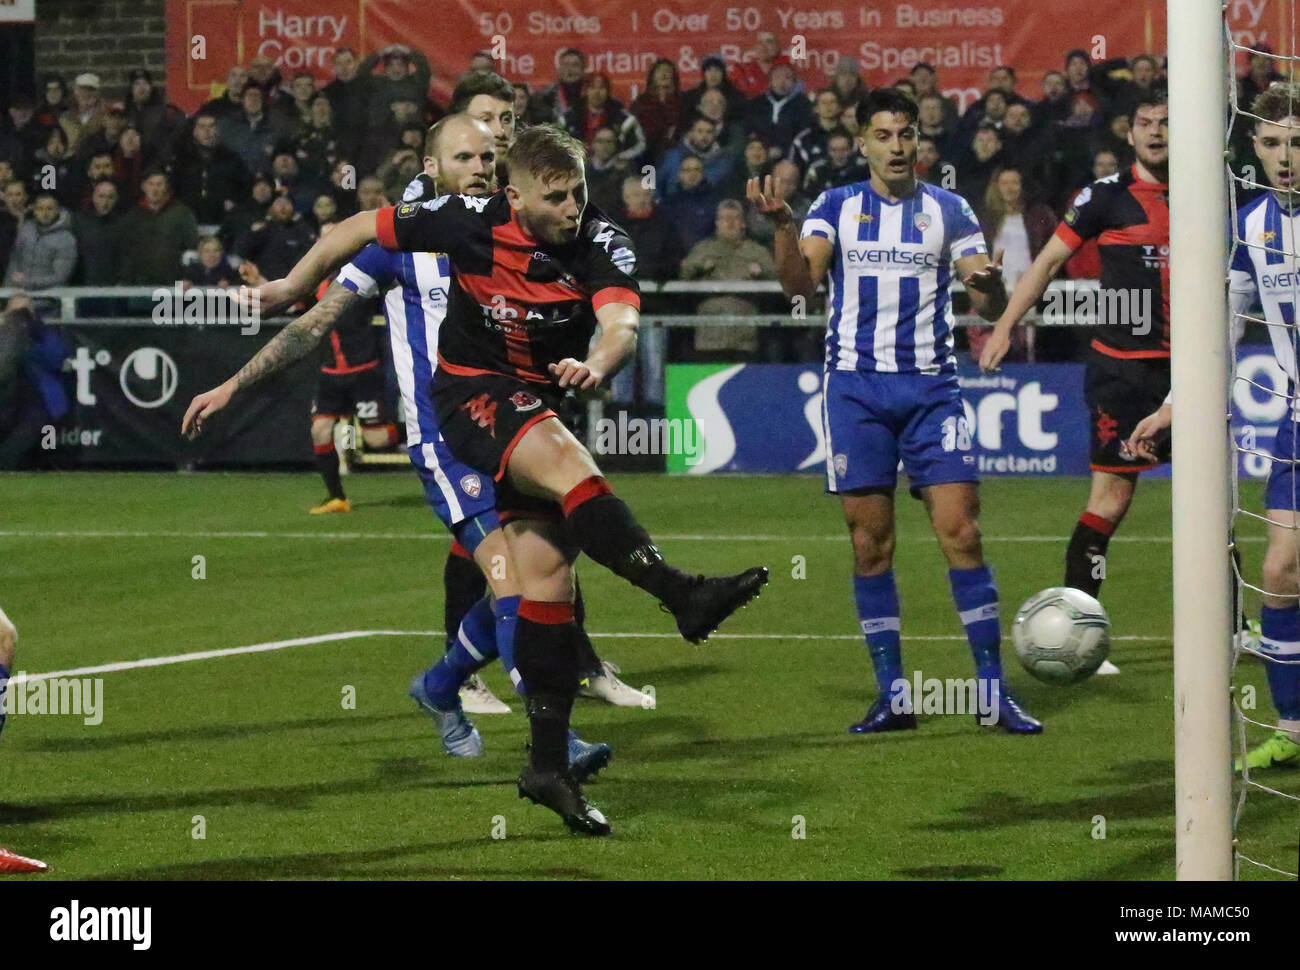 Seaview, Belfast, Northern Ireland, UK. 03 April 2018. Danske Bank Premiership - Crusaders 1 Coleraine 1. In tonight's top of the table clash at a packed Seaview, Crusaders drew 1-1 with Coleraine. The draw keeps Crusaders top of the league, two points ahead of Coleraine with four games to play. David Cushley fires in a late equaliser for Crusaders. Credit: David Hunter/Alamy Live News. Stock Photo